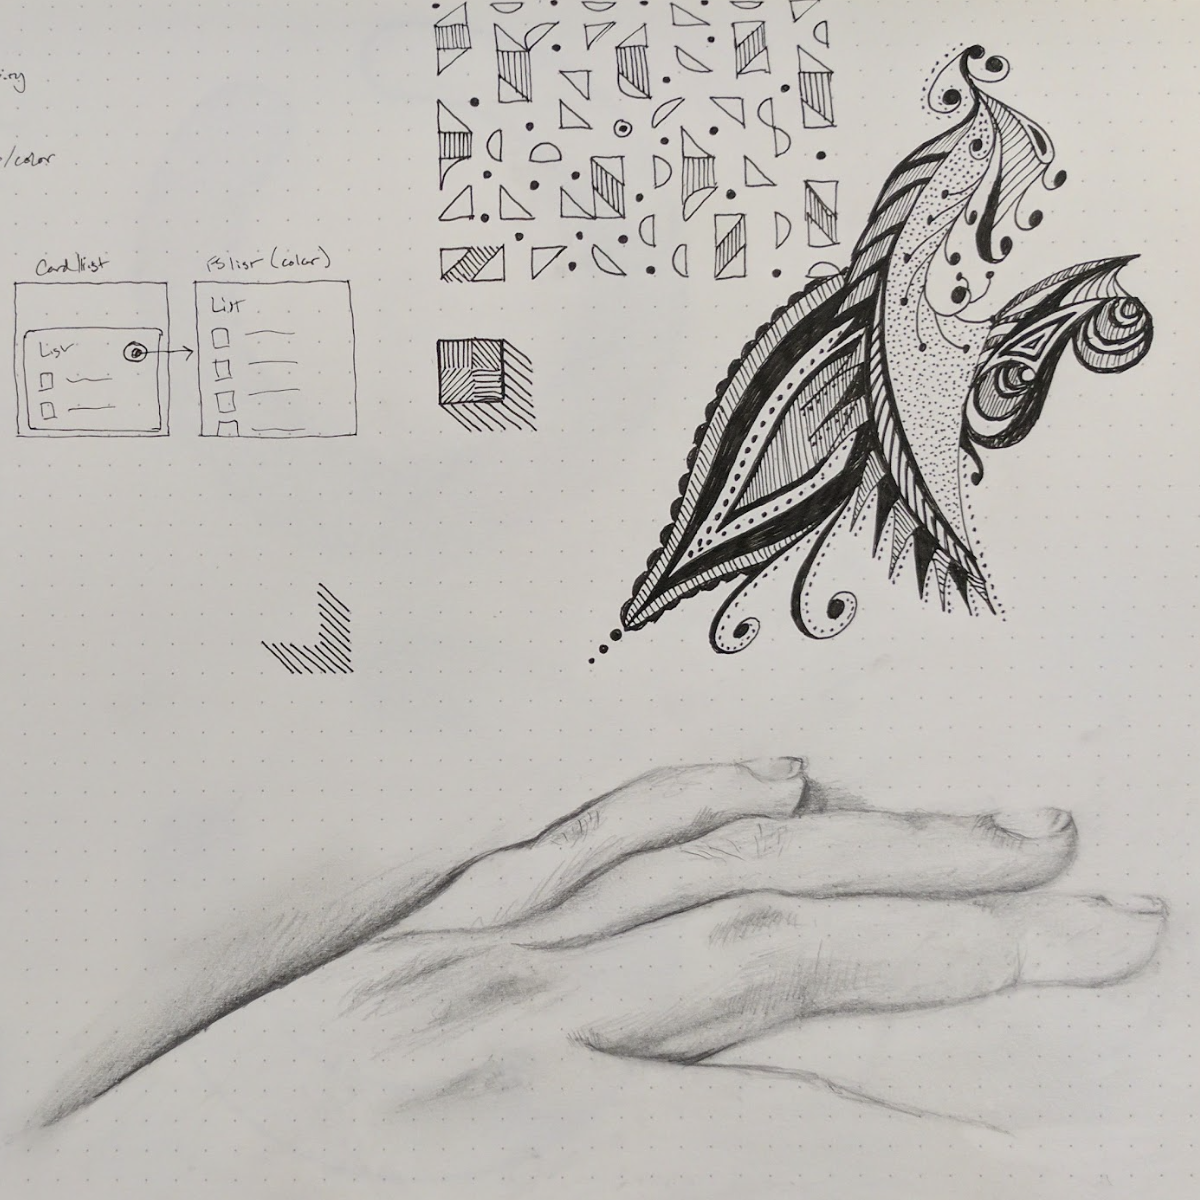 a photo from my sketchbook showing a drawing of a hand, and some abstract designs